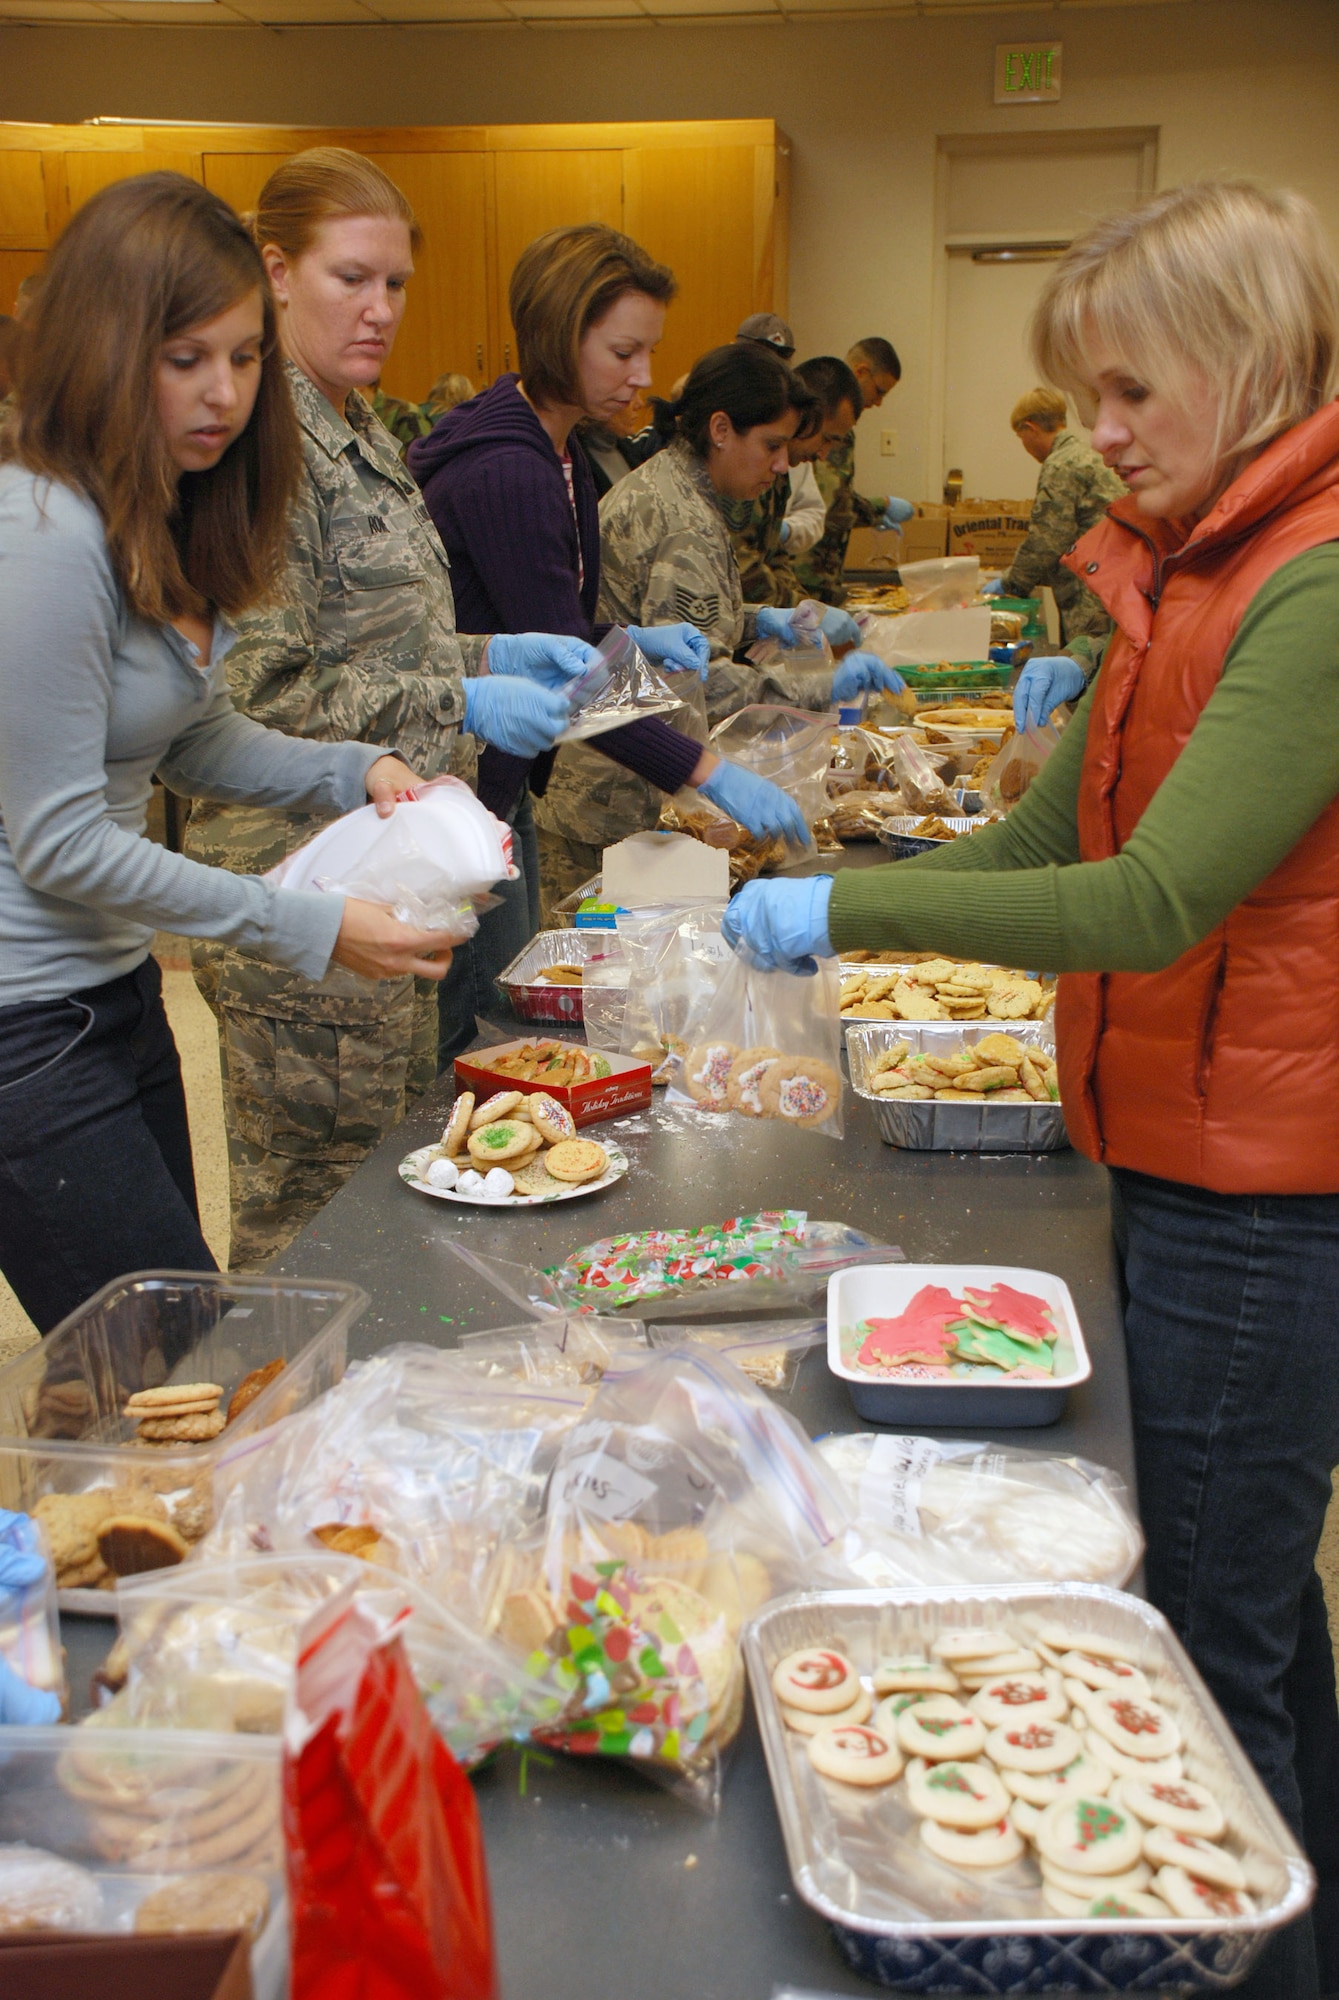 Volunteers bag cookies for dormitory Airmen in support of the Cookies for the Troops drive Dec. 16 at Peterson Air Force Base, Colo. More than 6,600 cookies were donated by Peterson and Schriever AFB military and family members for nearly 400 Airmen living in the Peterson dormitories. (U.S. Air Force photo/Staff Sgt. Amanda Delisle)
